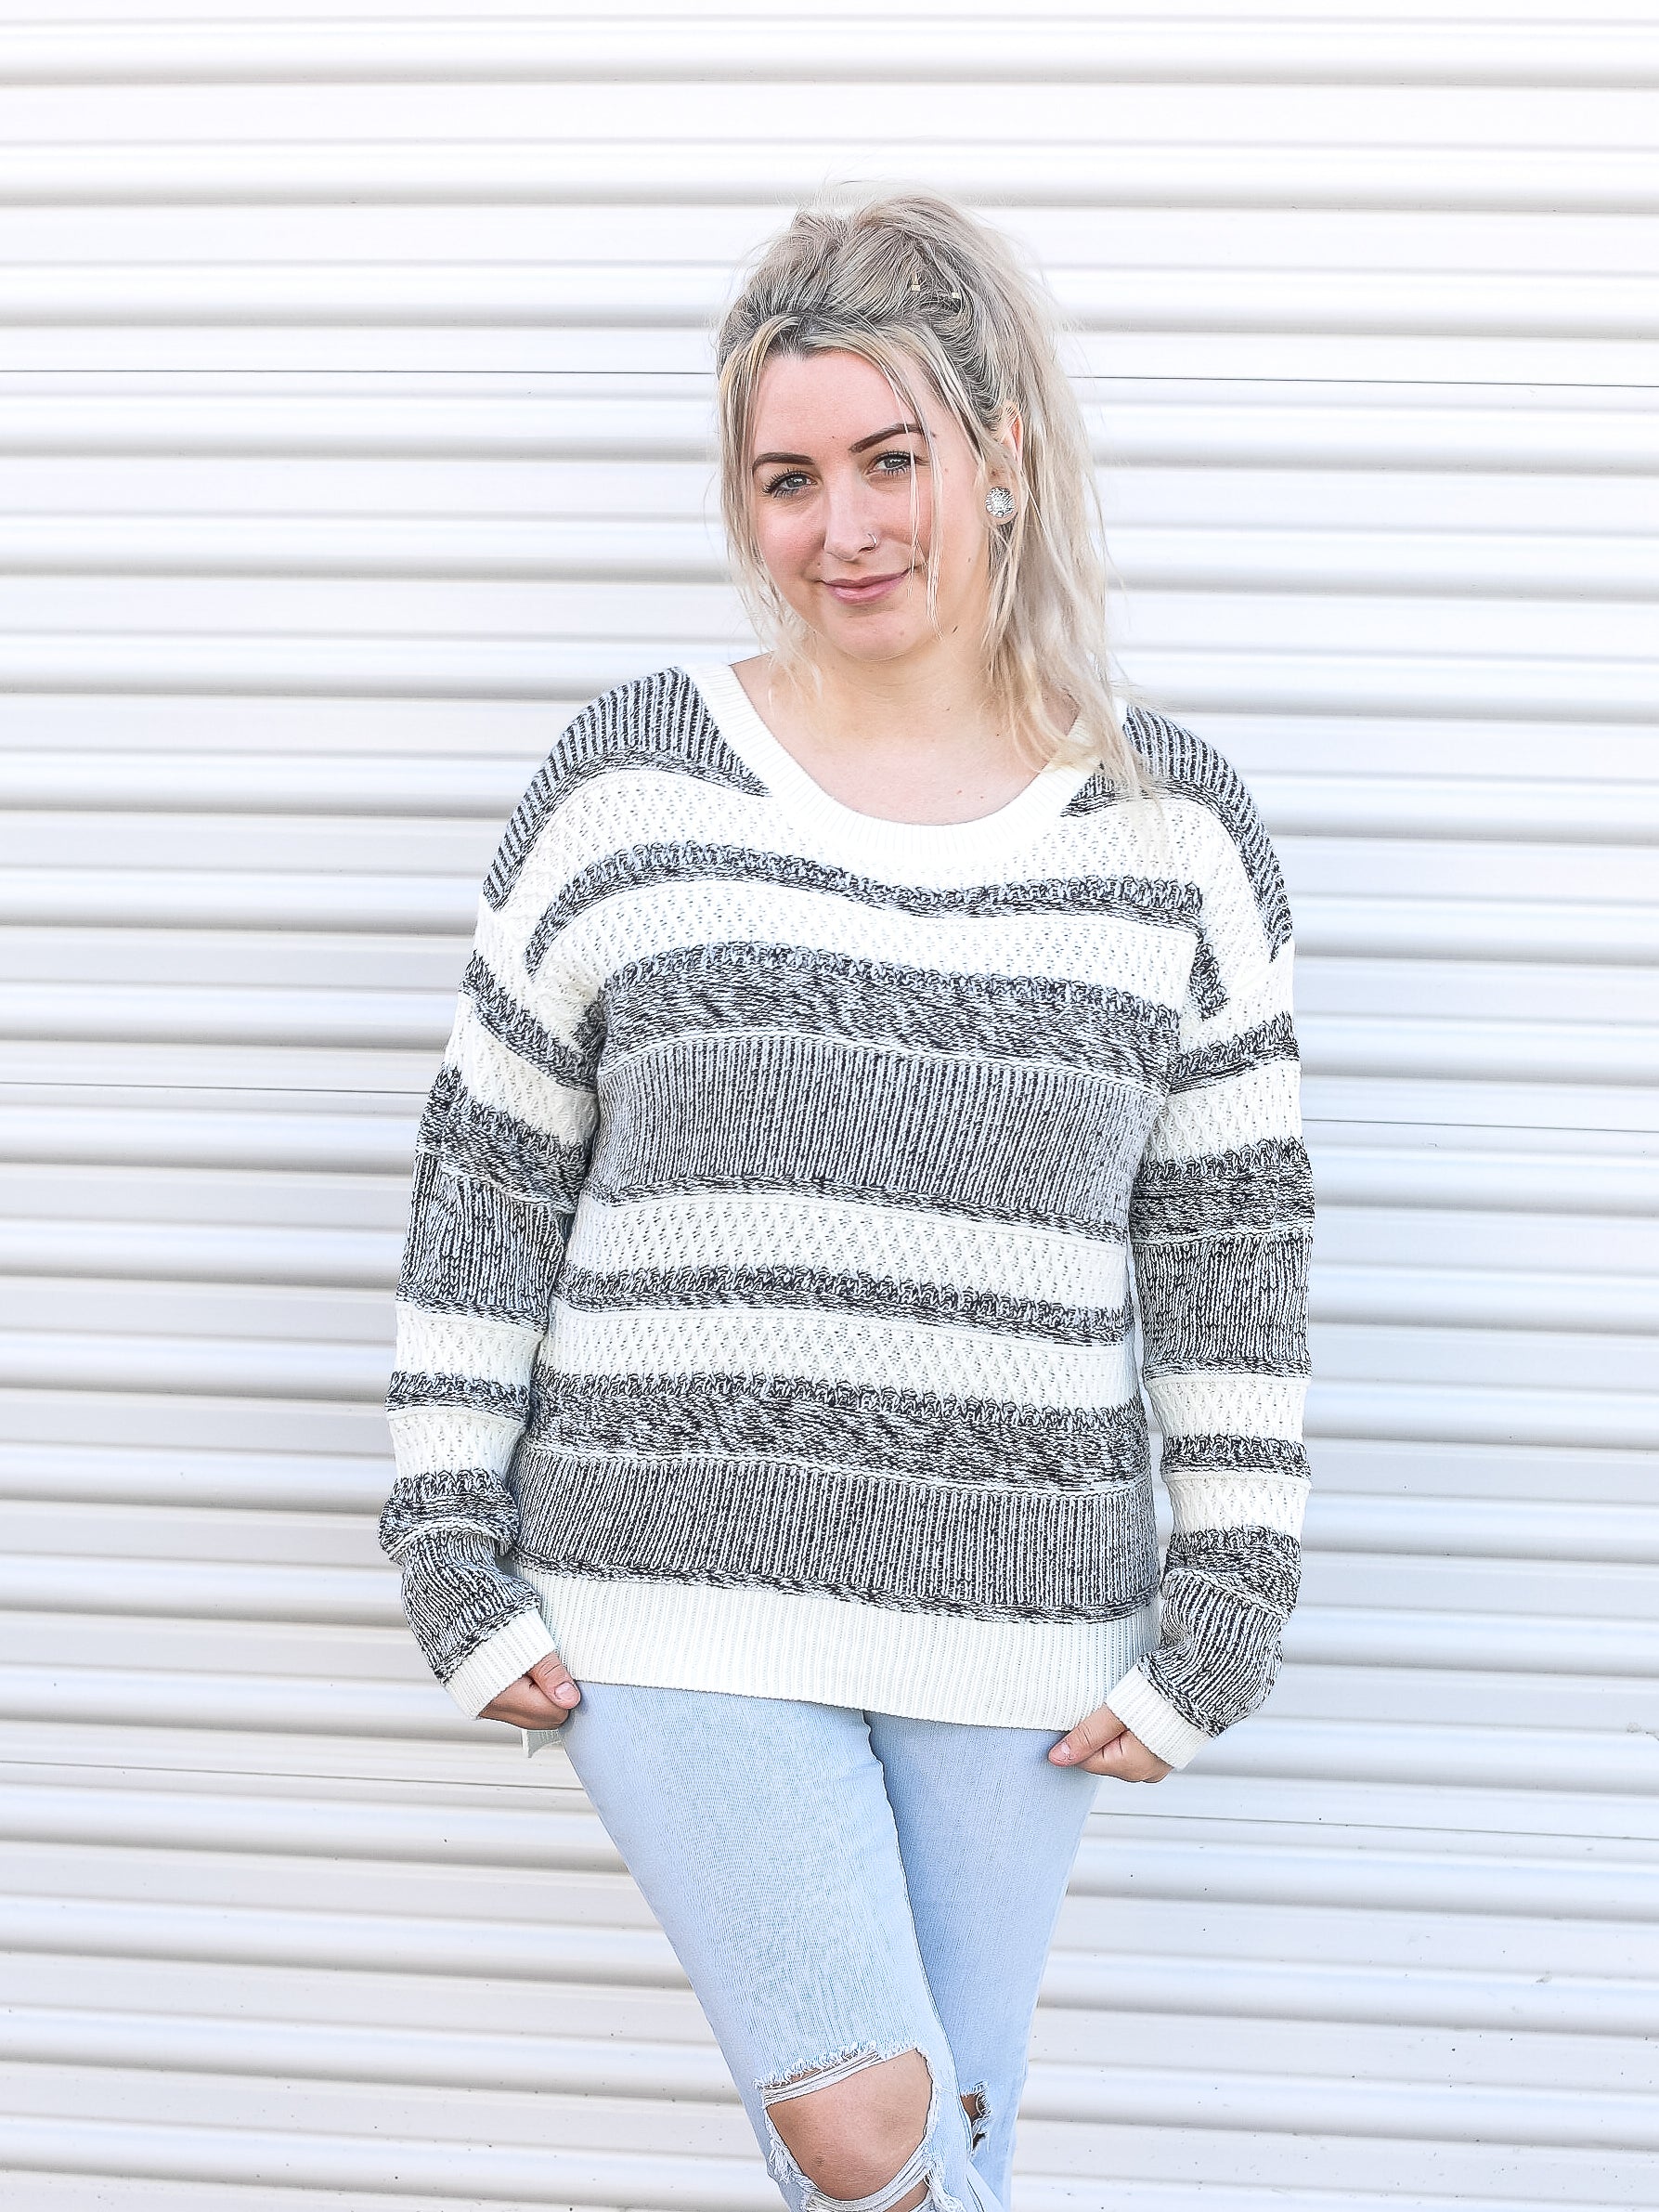 White sweater with black/grey horizontal stripes in various thicknesses. 